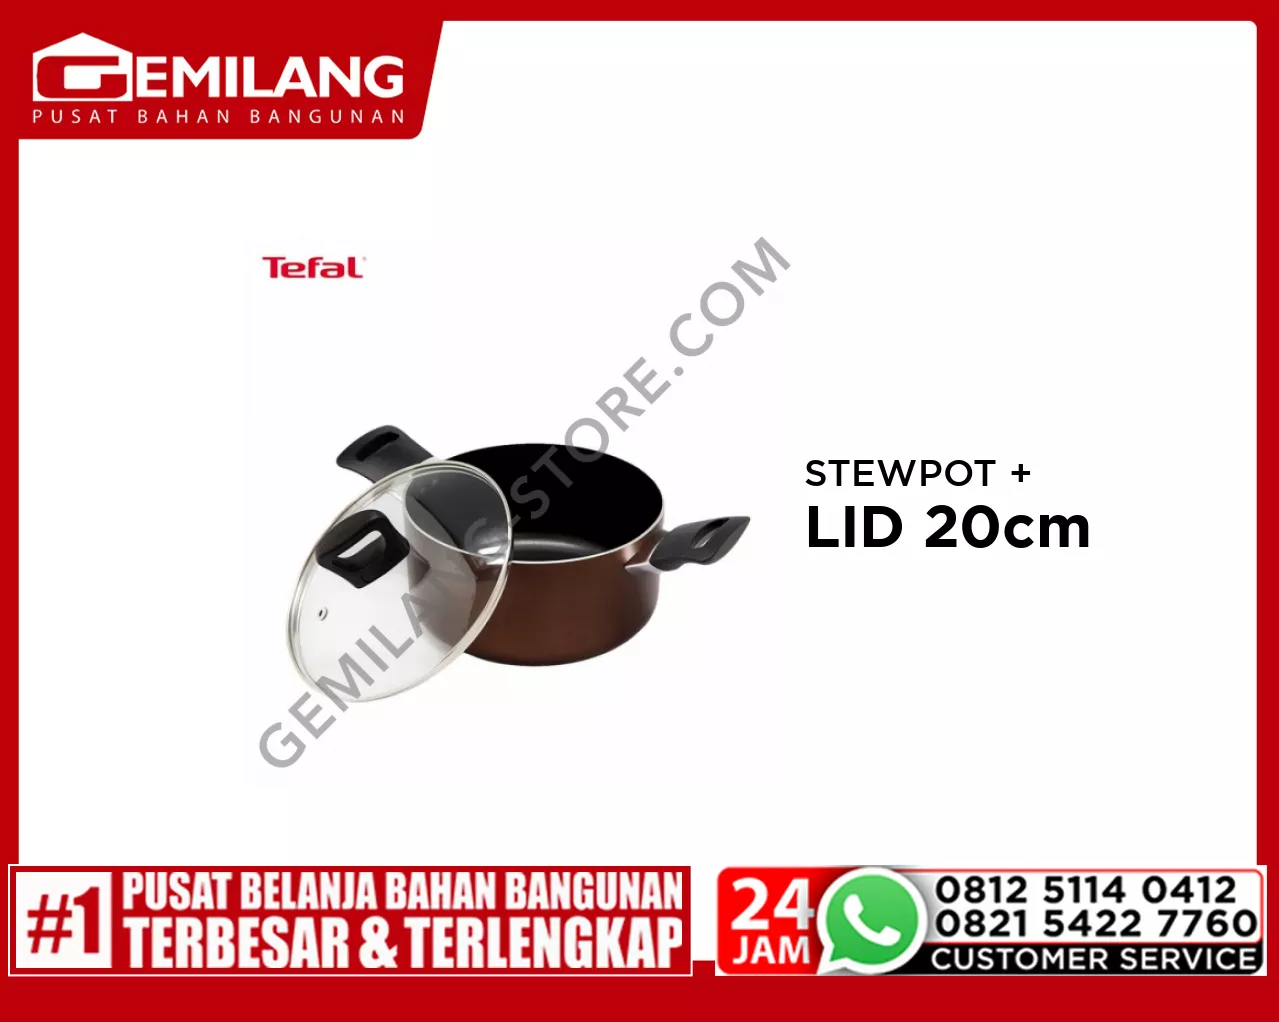 TEFAL DAY BY DAY STEWPOT + LID 20cm